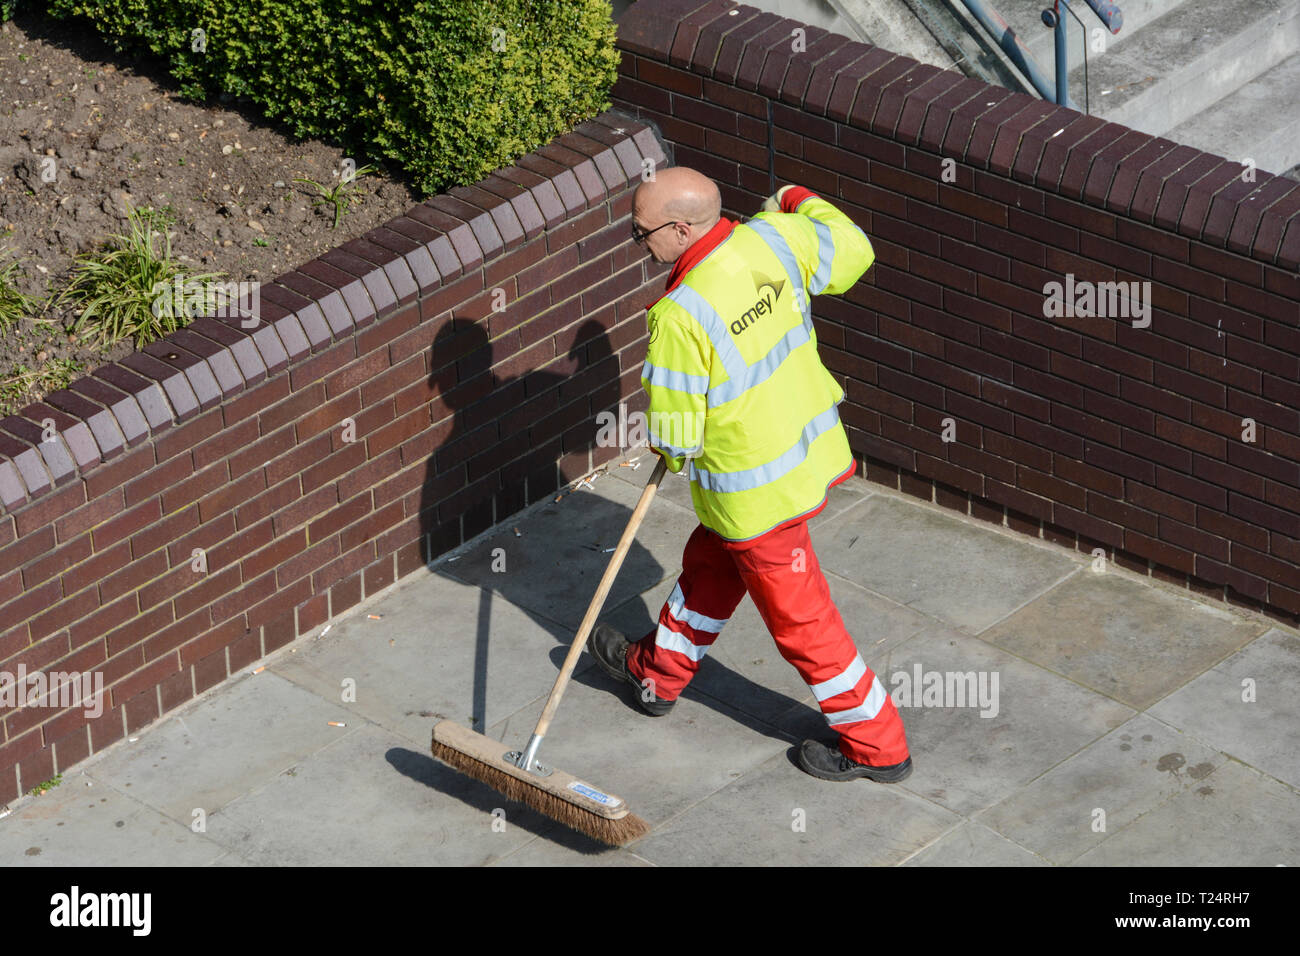 A hard-working and meticulous City of London (Amey) road sweeper on a hot summer's day Stock Photo